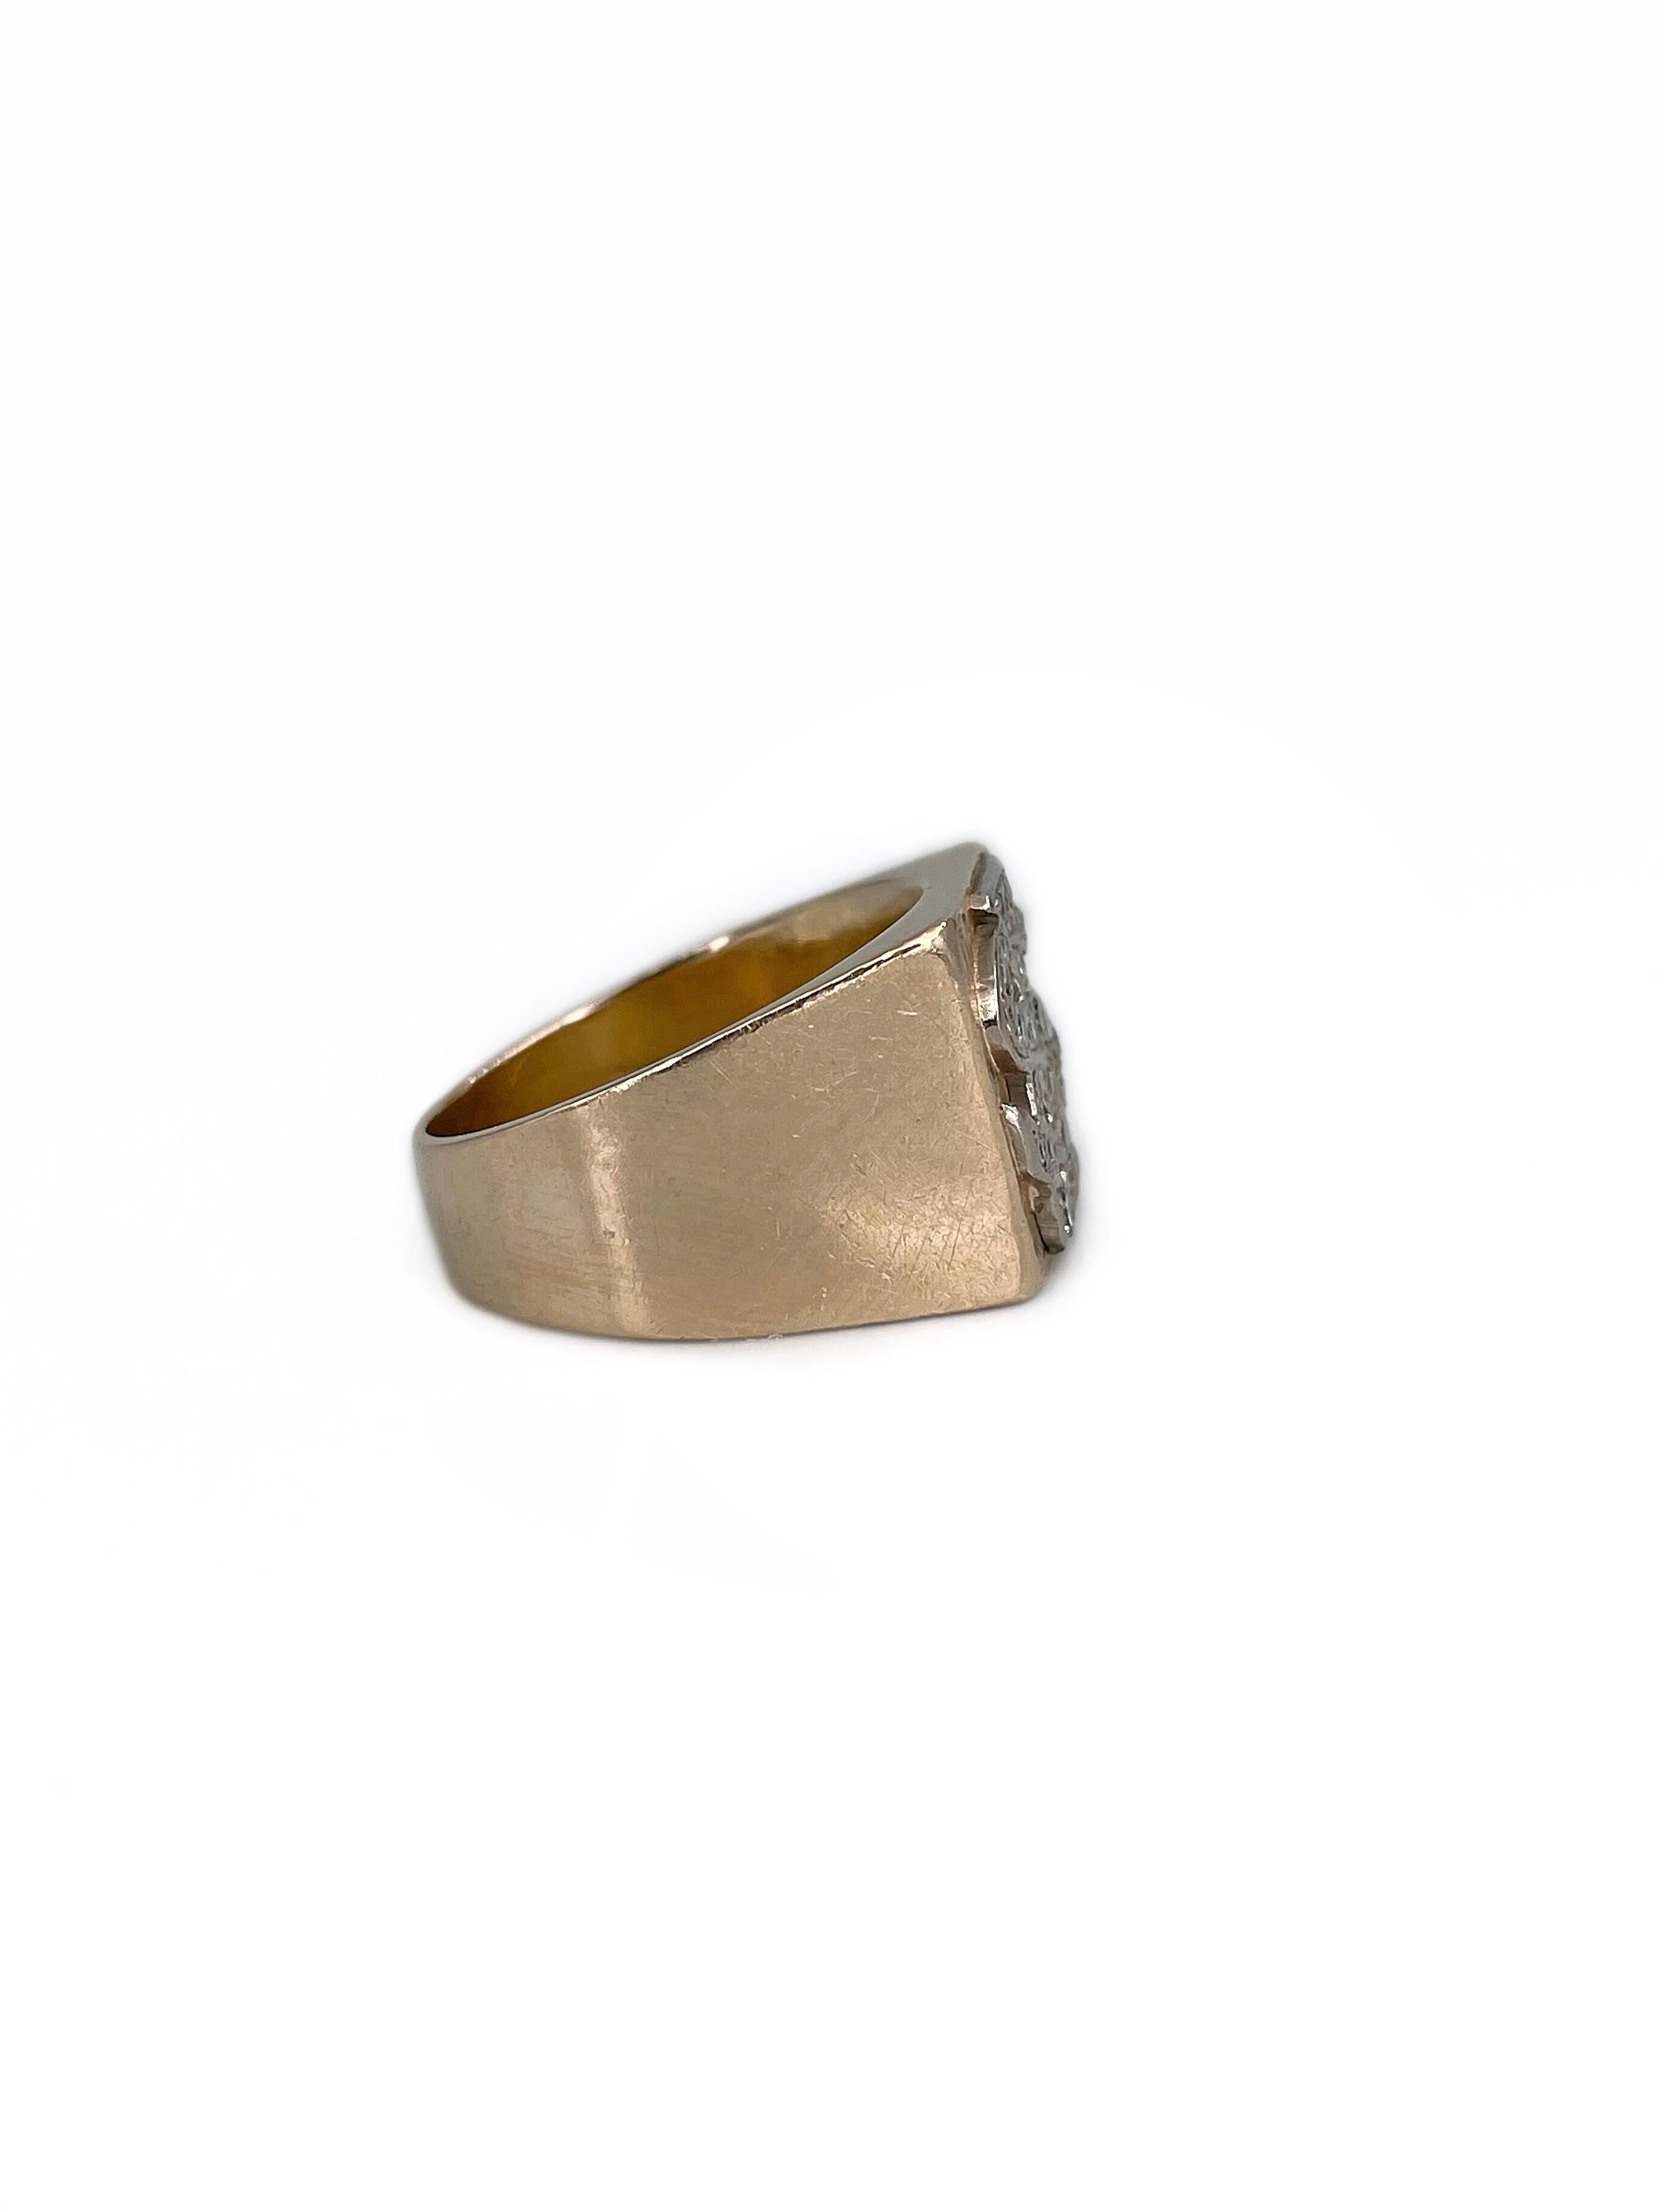 This is an exceptional massive initial signet ring crafted in 18K slightly yellow gold. Circa 1950. 

Intertwined letters J and S are encrusted with diamonds. 

Front of a ring has a subtle texture. 

Weight: 18.93g
Size: 19.75 (US 10)

IMPORTANT: